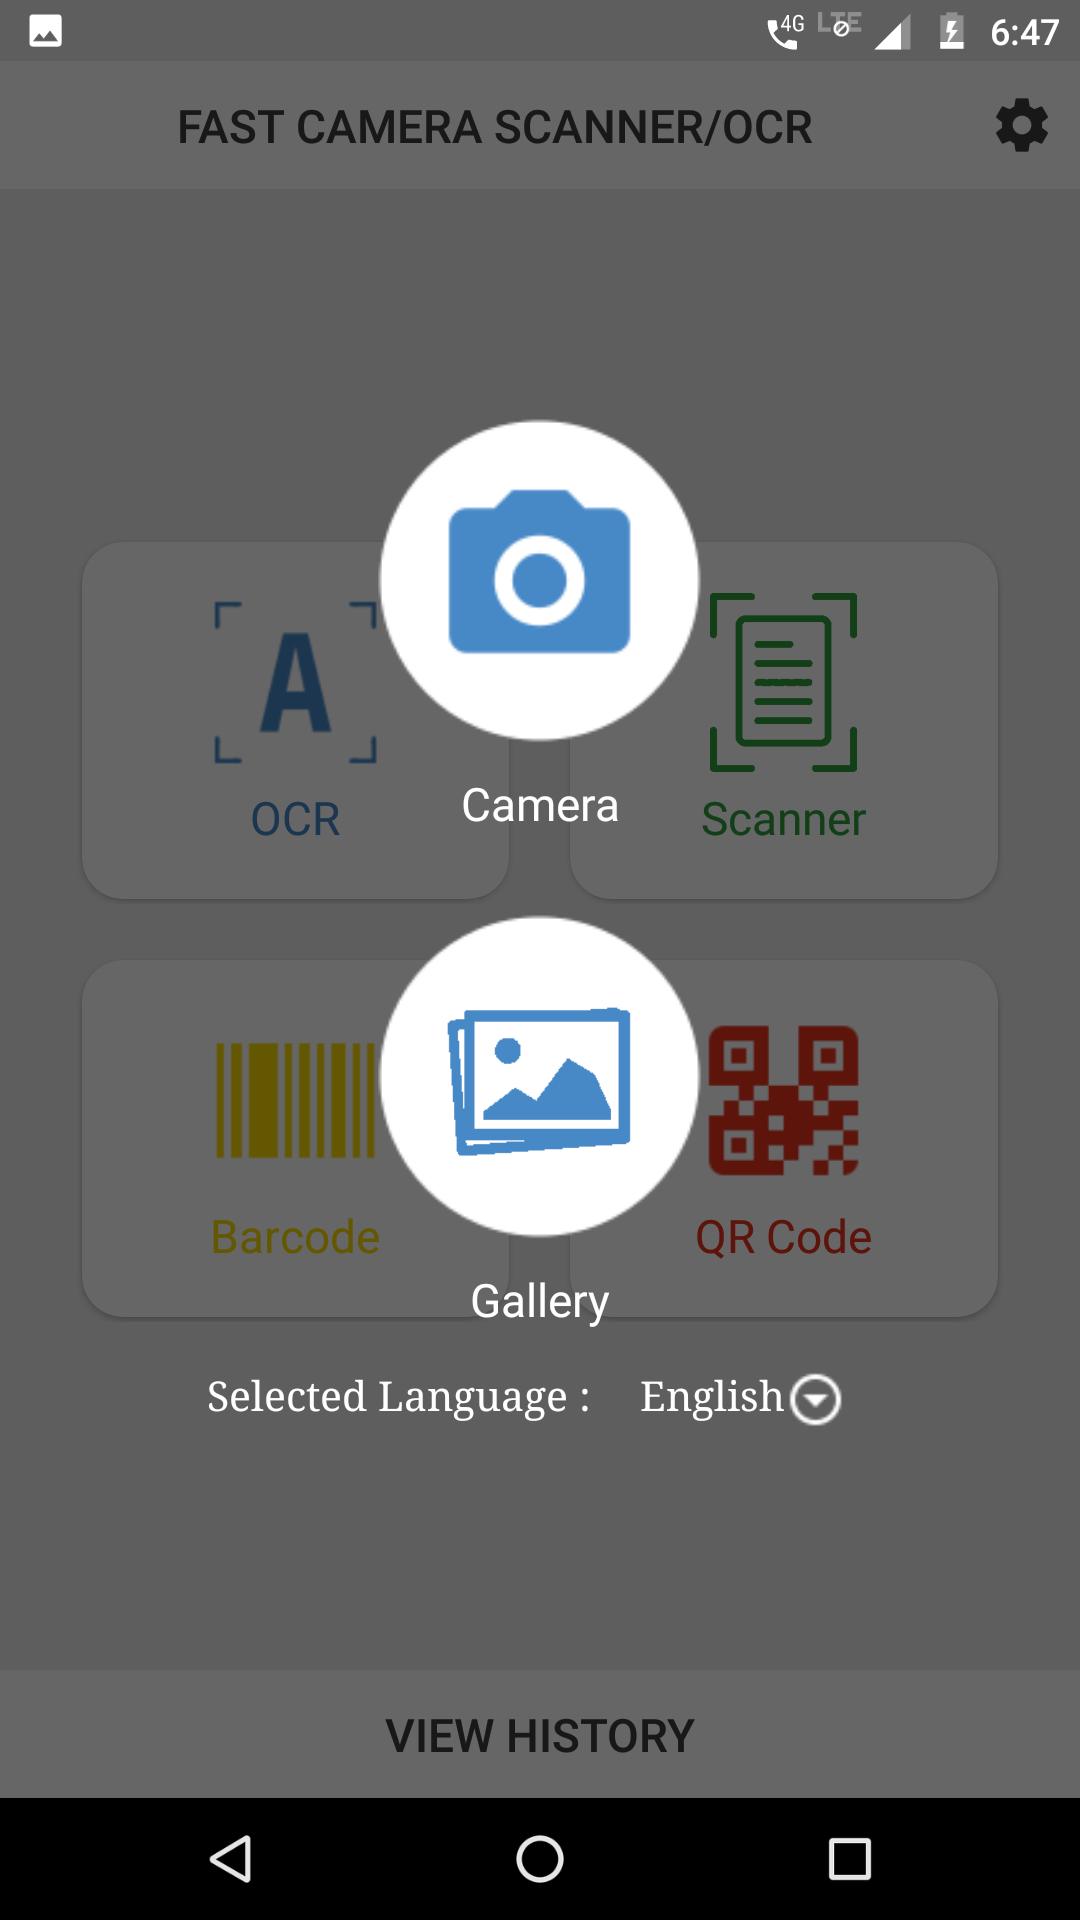 Ocr сканер. Barcode and OCR. Fast Camera. Scan in English.